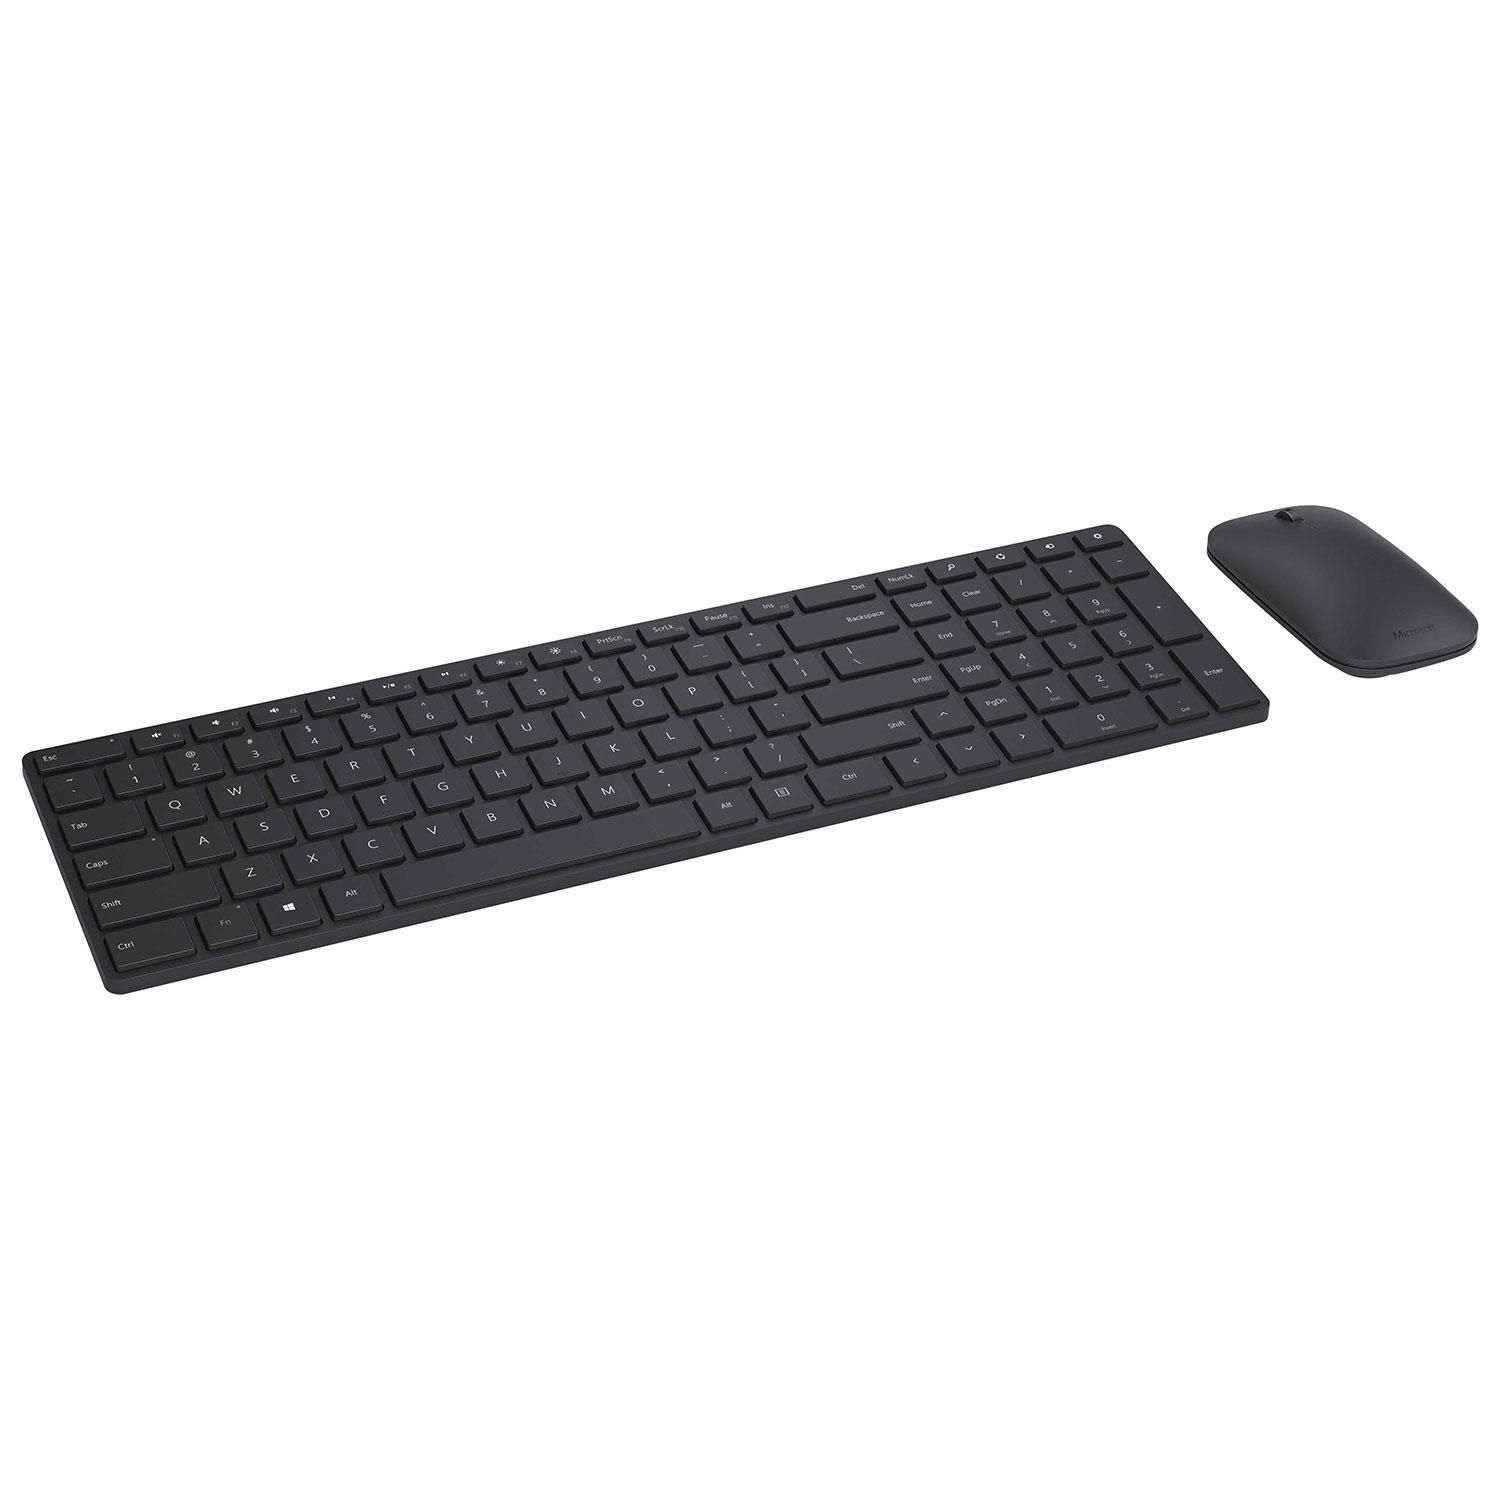 Microsoft 7N9-00003 Designer Bluetooth BlueTrack Keyboard & Mouse Combo - French